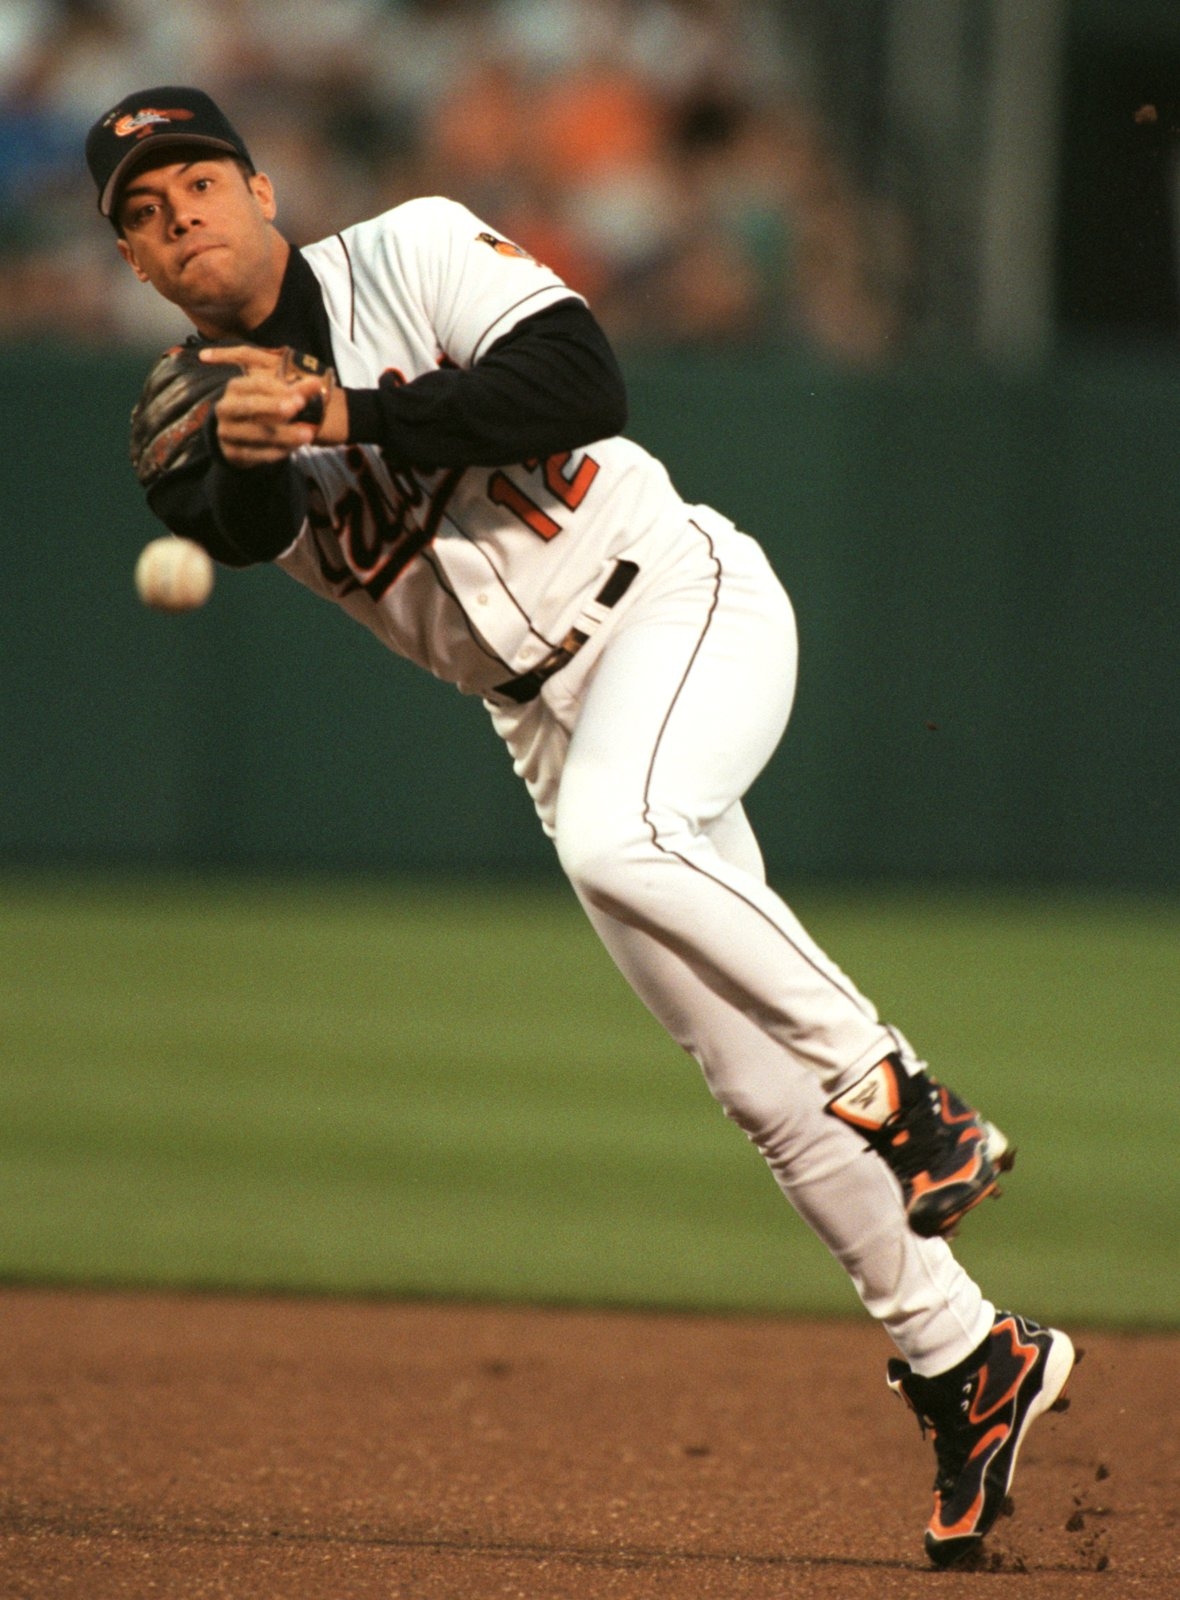 CAMDEN YARDS--Aug 19, 1998--Orioles' second baseman, Roberto Alomar, fields the ball against Tampa Bay Devil Rays' Bobby Smith, to get him out at first base for the third out in the first inning. Photo by Gene Sweeney Jr/staff